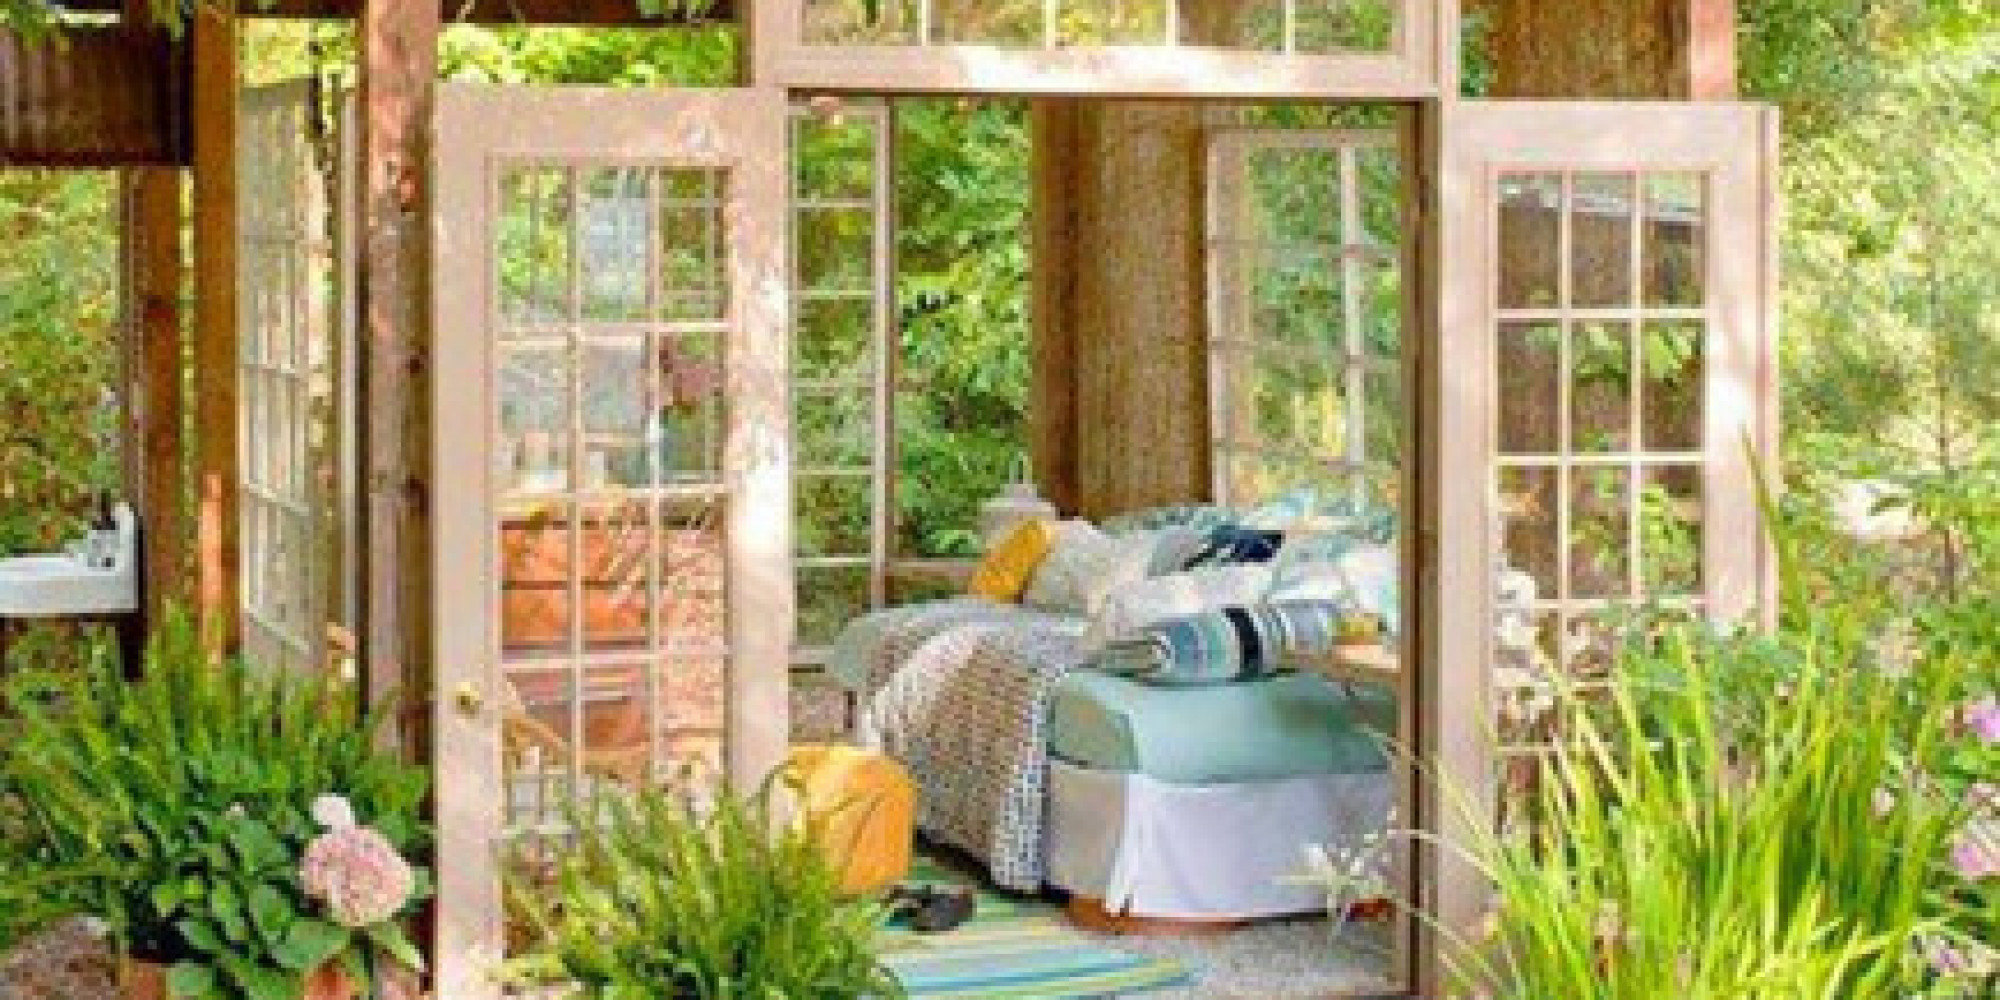 'She Sheds' Are The New Man Caves | HuffPost